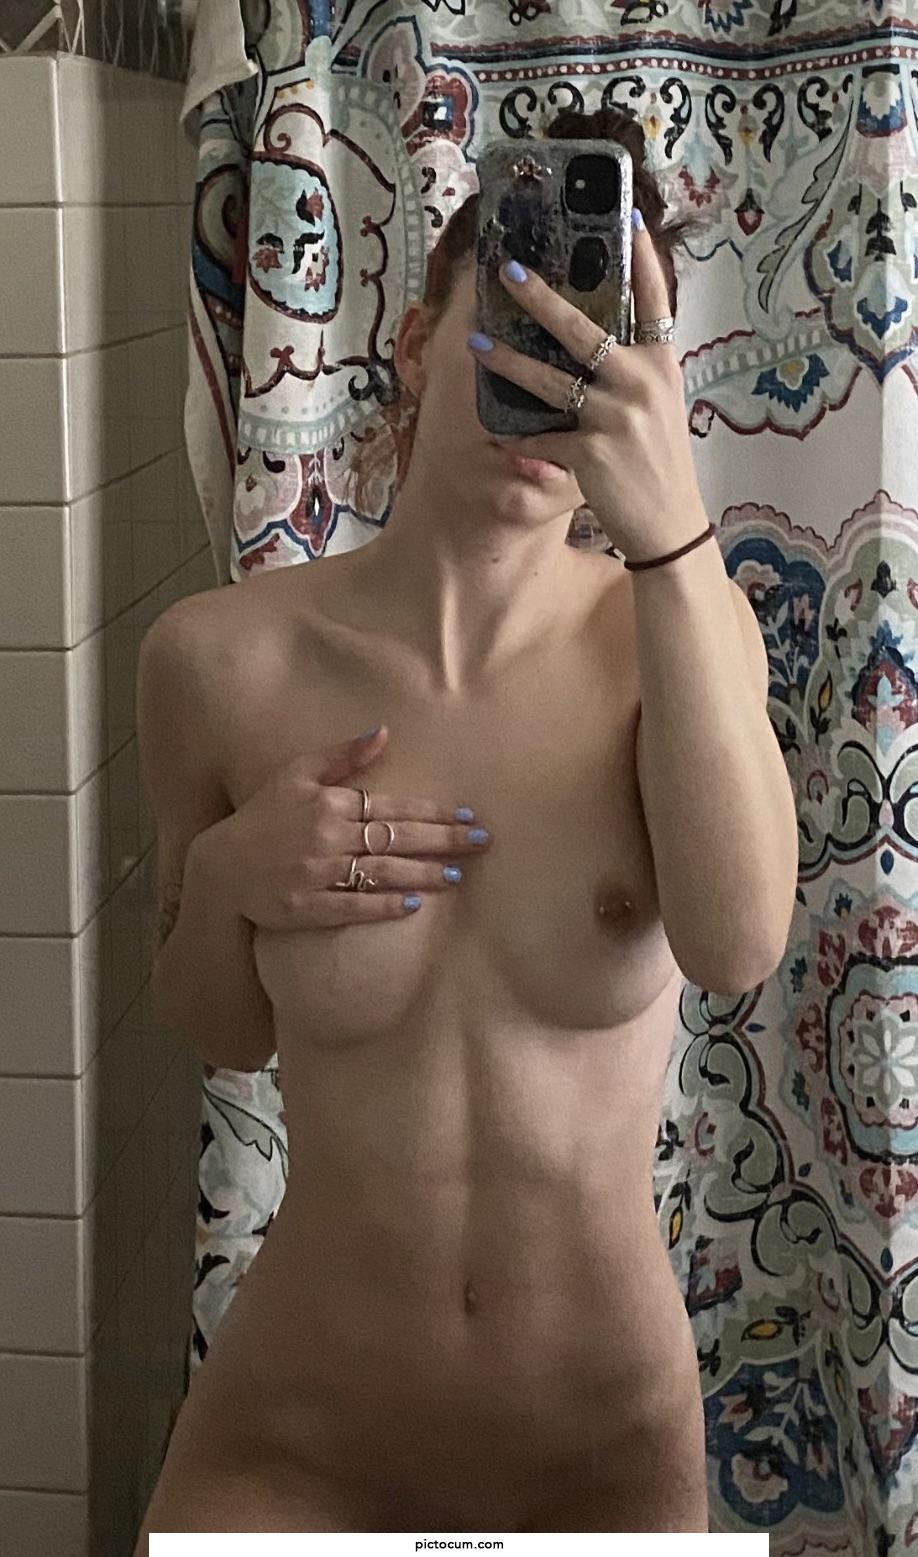 19 and ready to fuck 😏